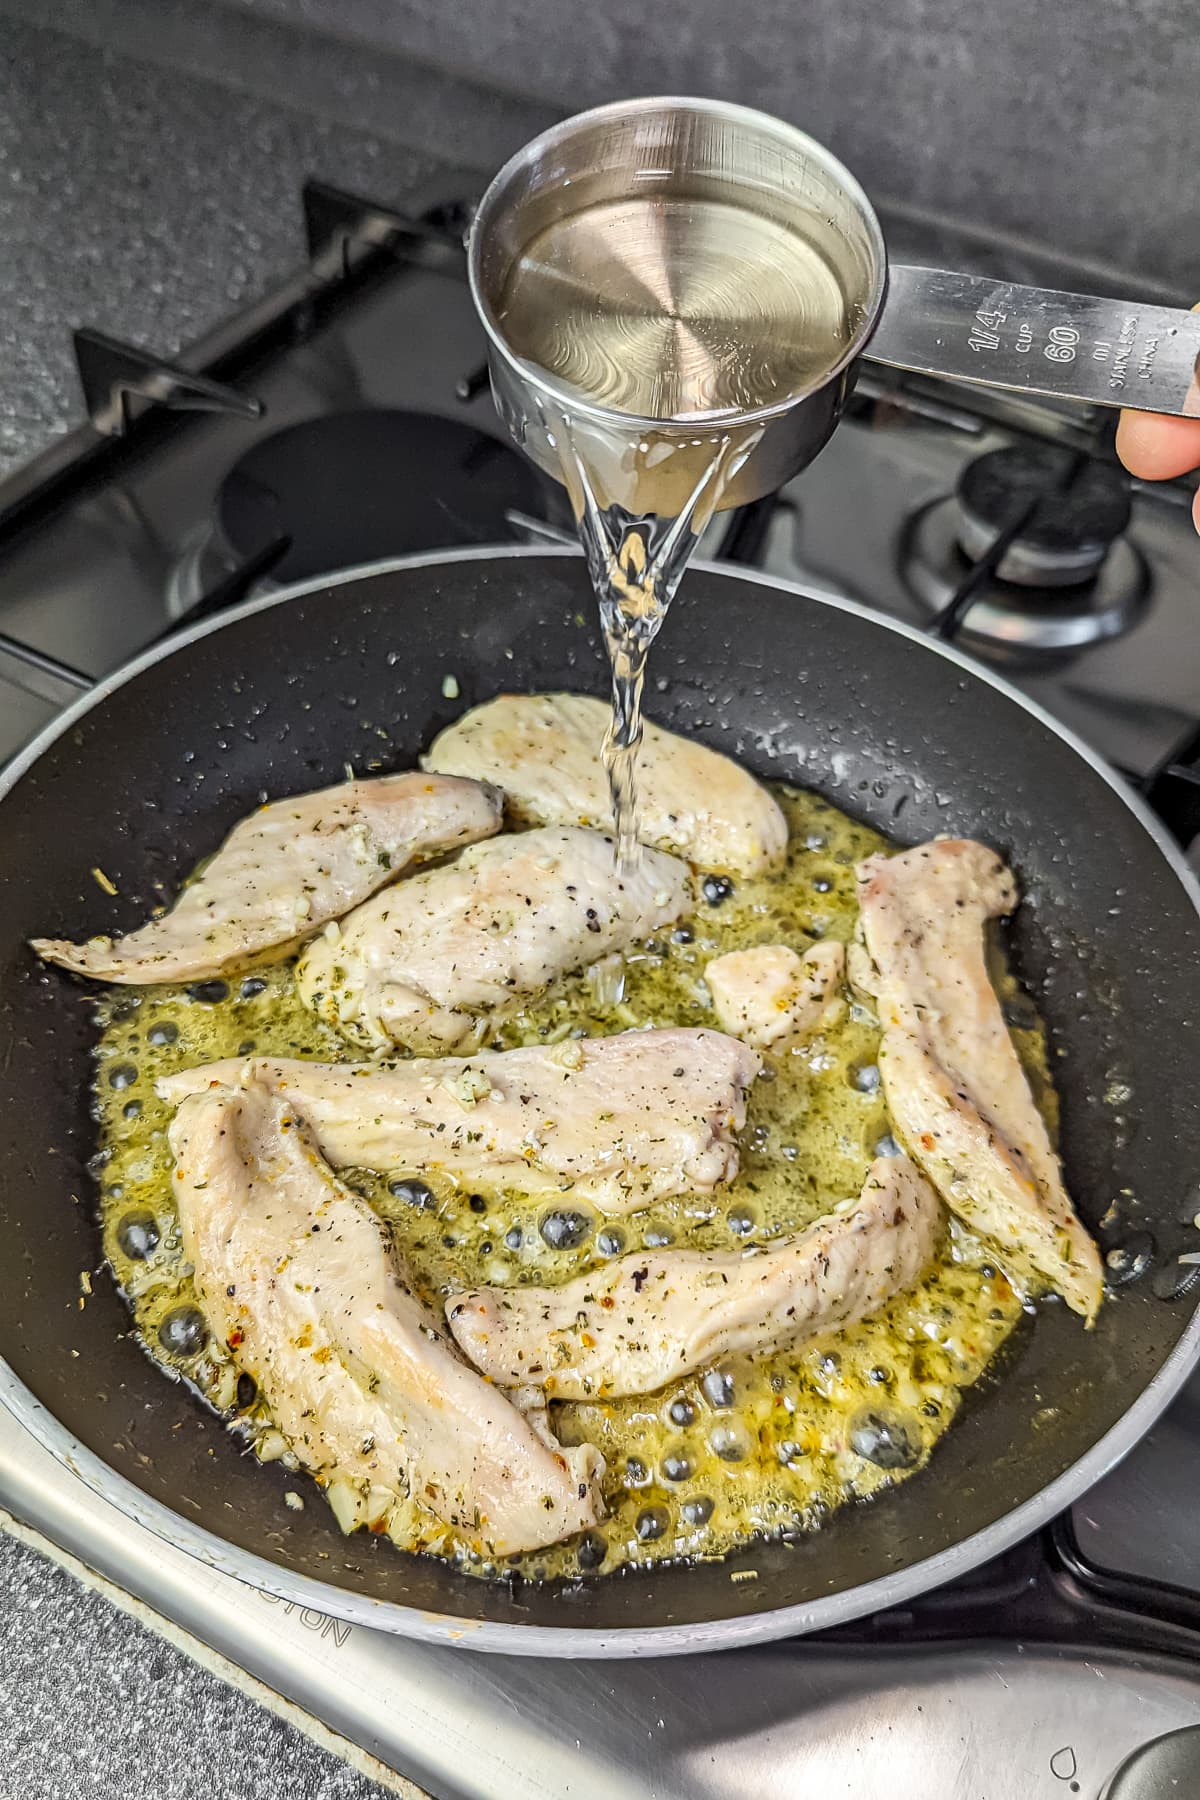 A measuring cup pouring white wine into the skillet with the chicken and herbs.